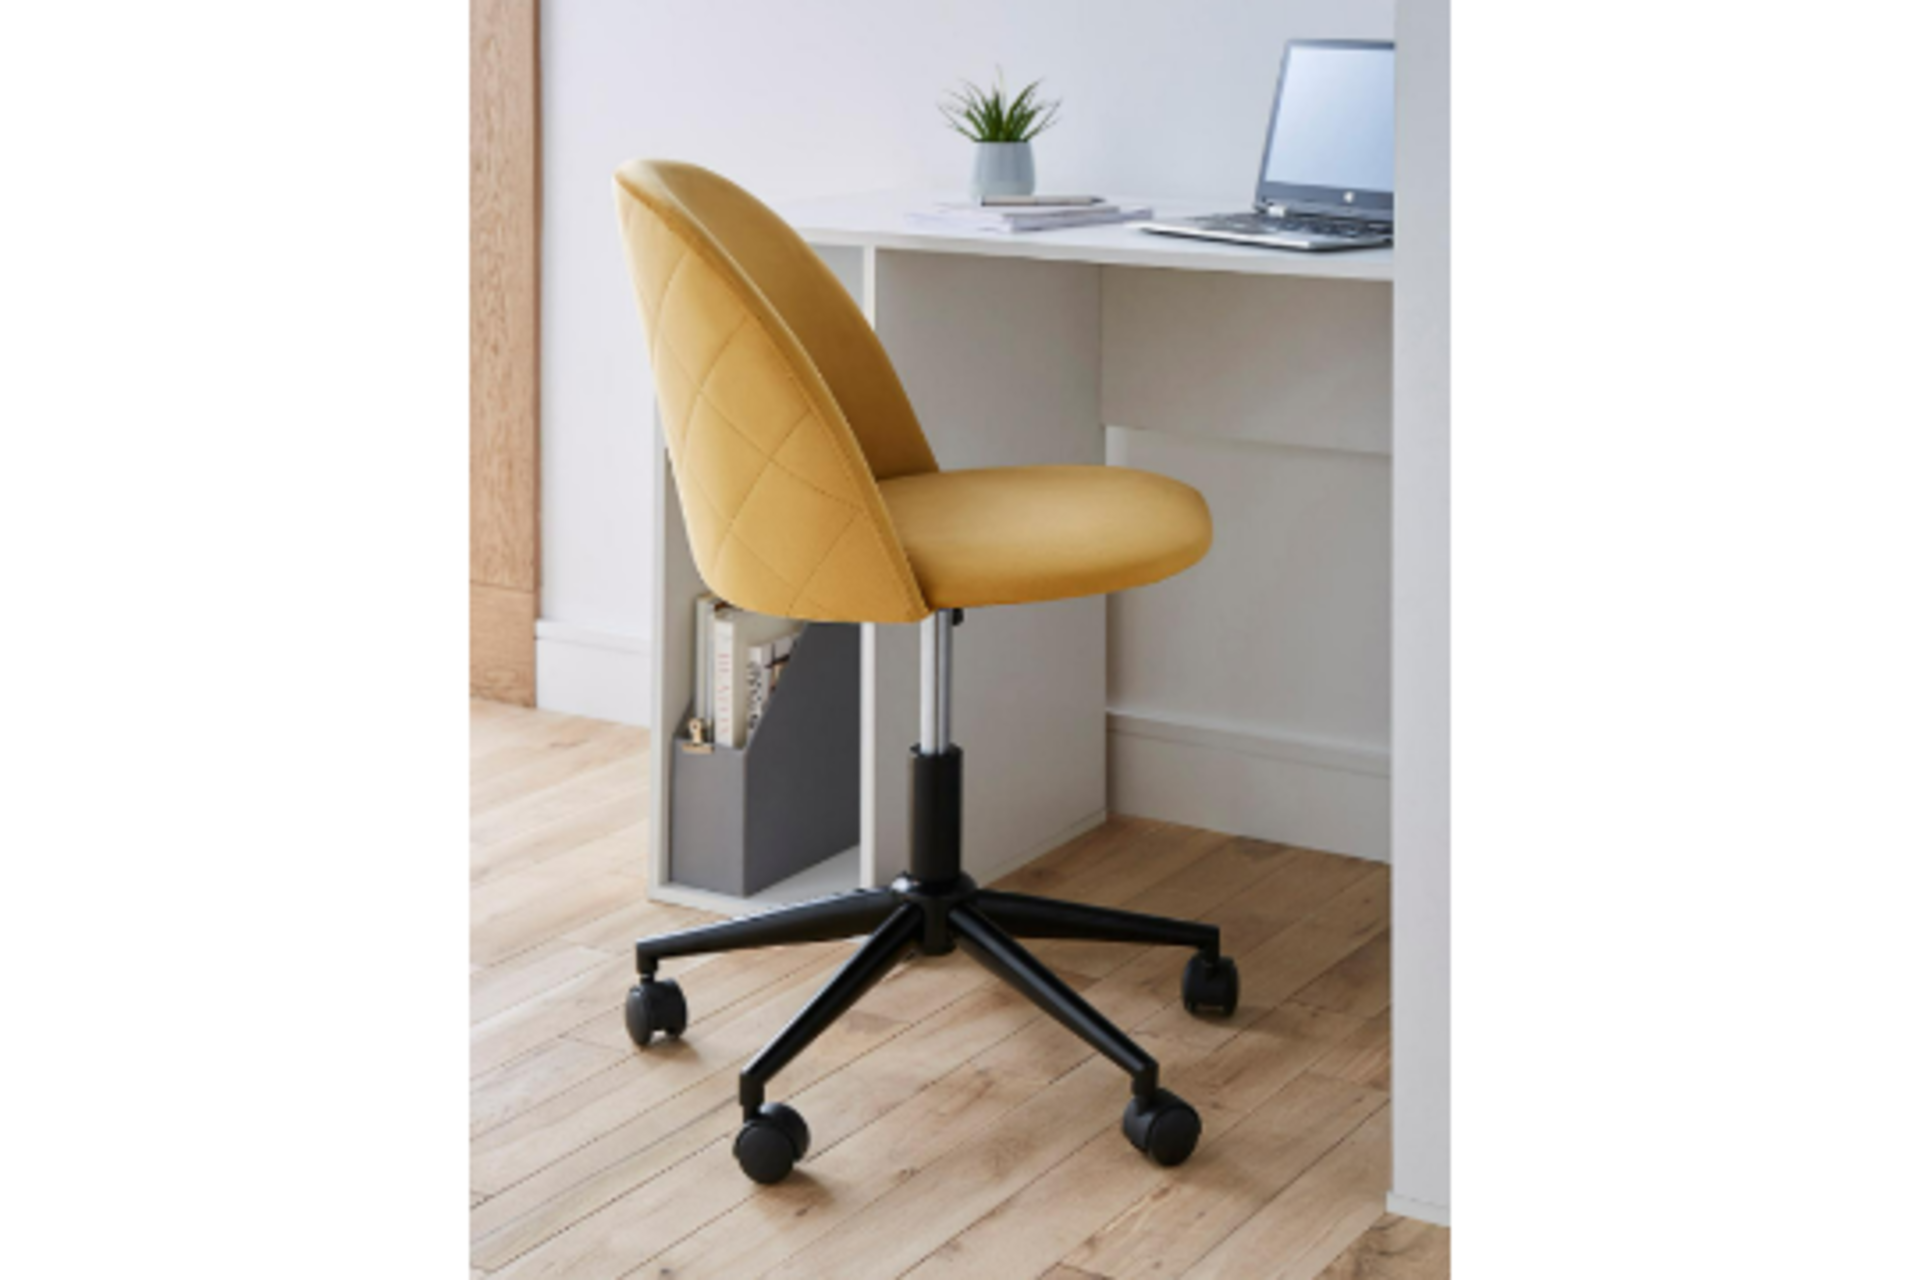 Brand New & Boxed Klara Office Chair - Ochre. RRP £199 each. The Klara Office Chair is a luxurious - Image 2 of 3